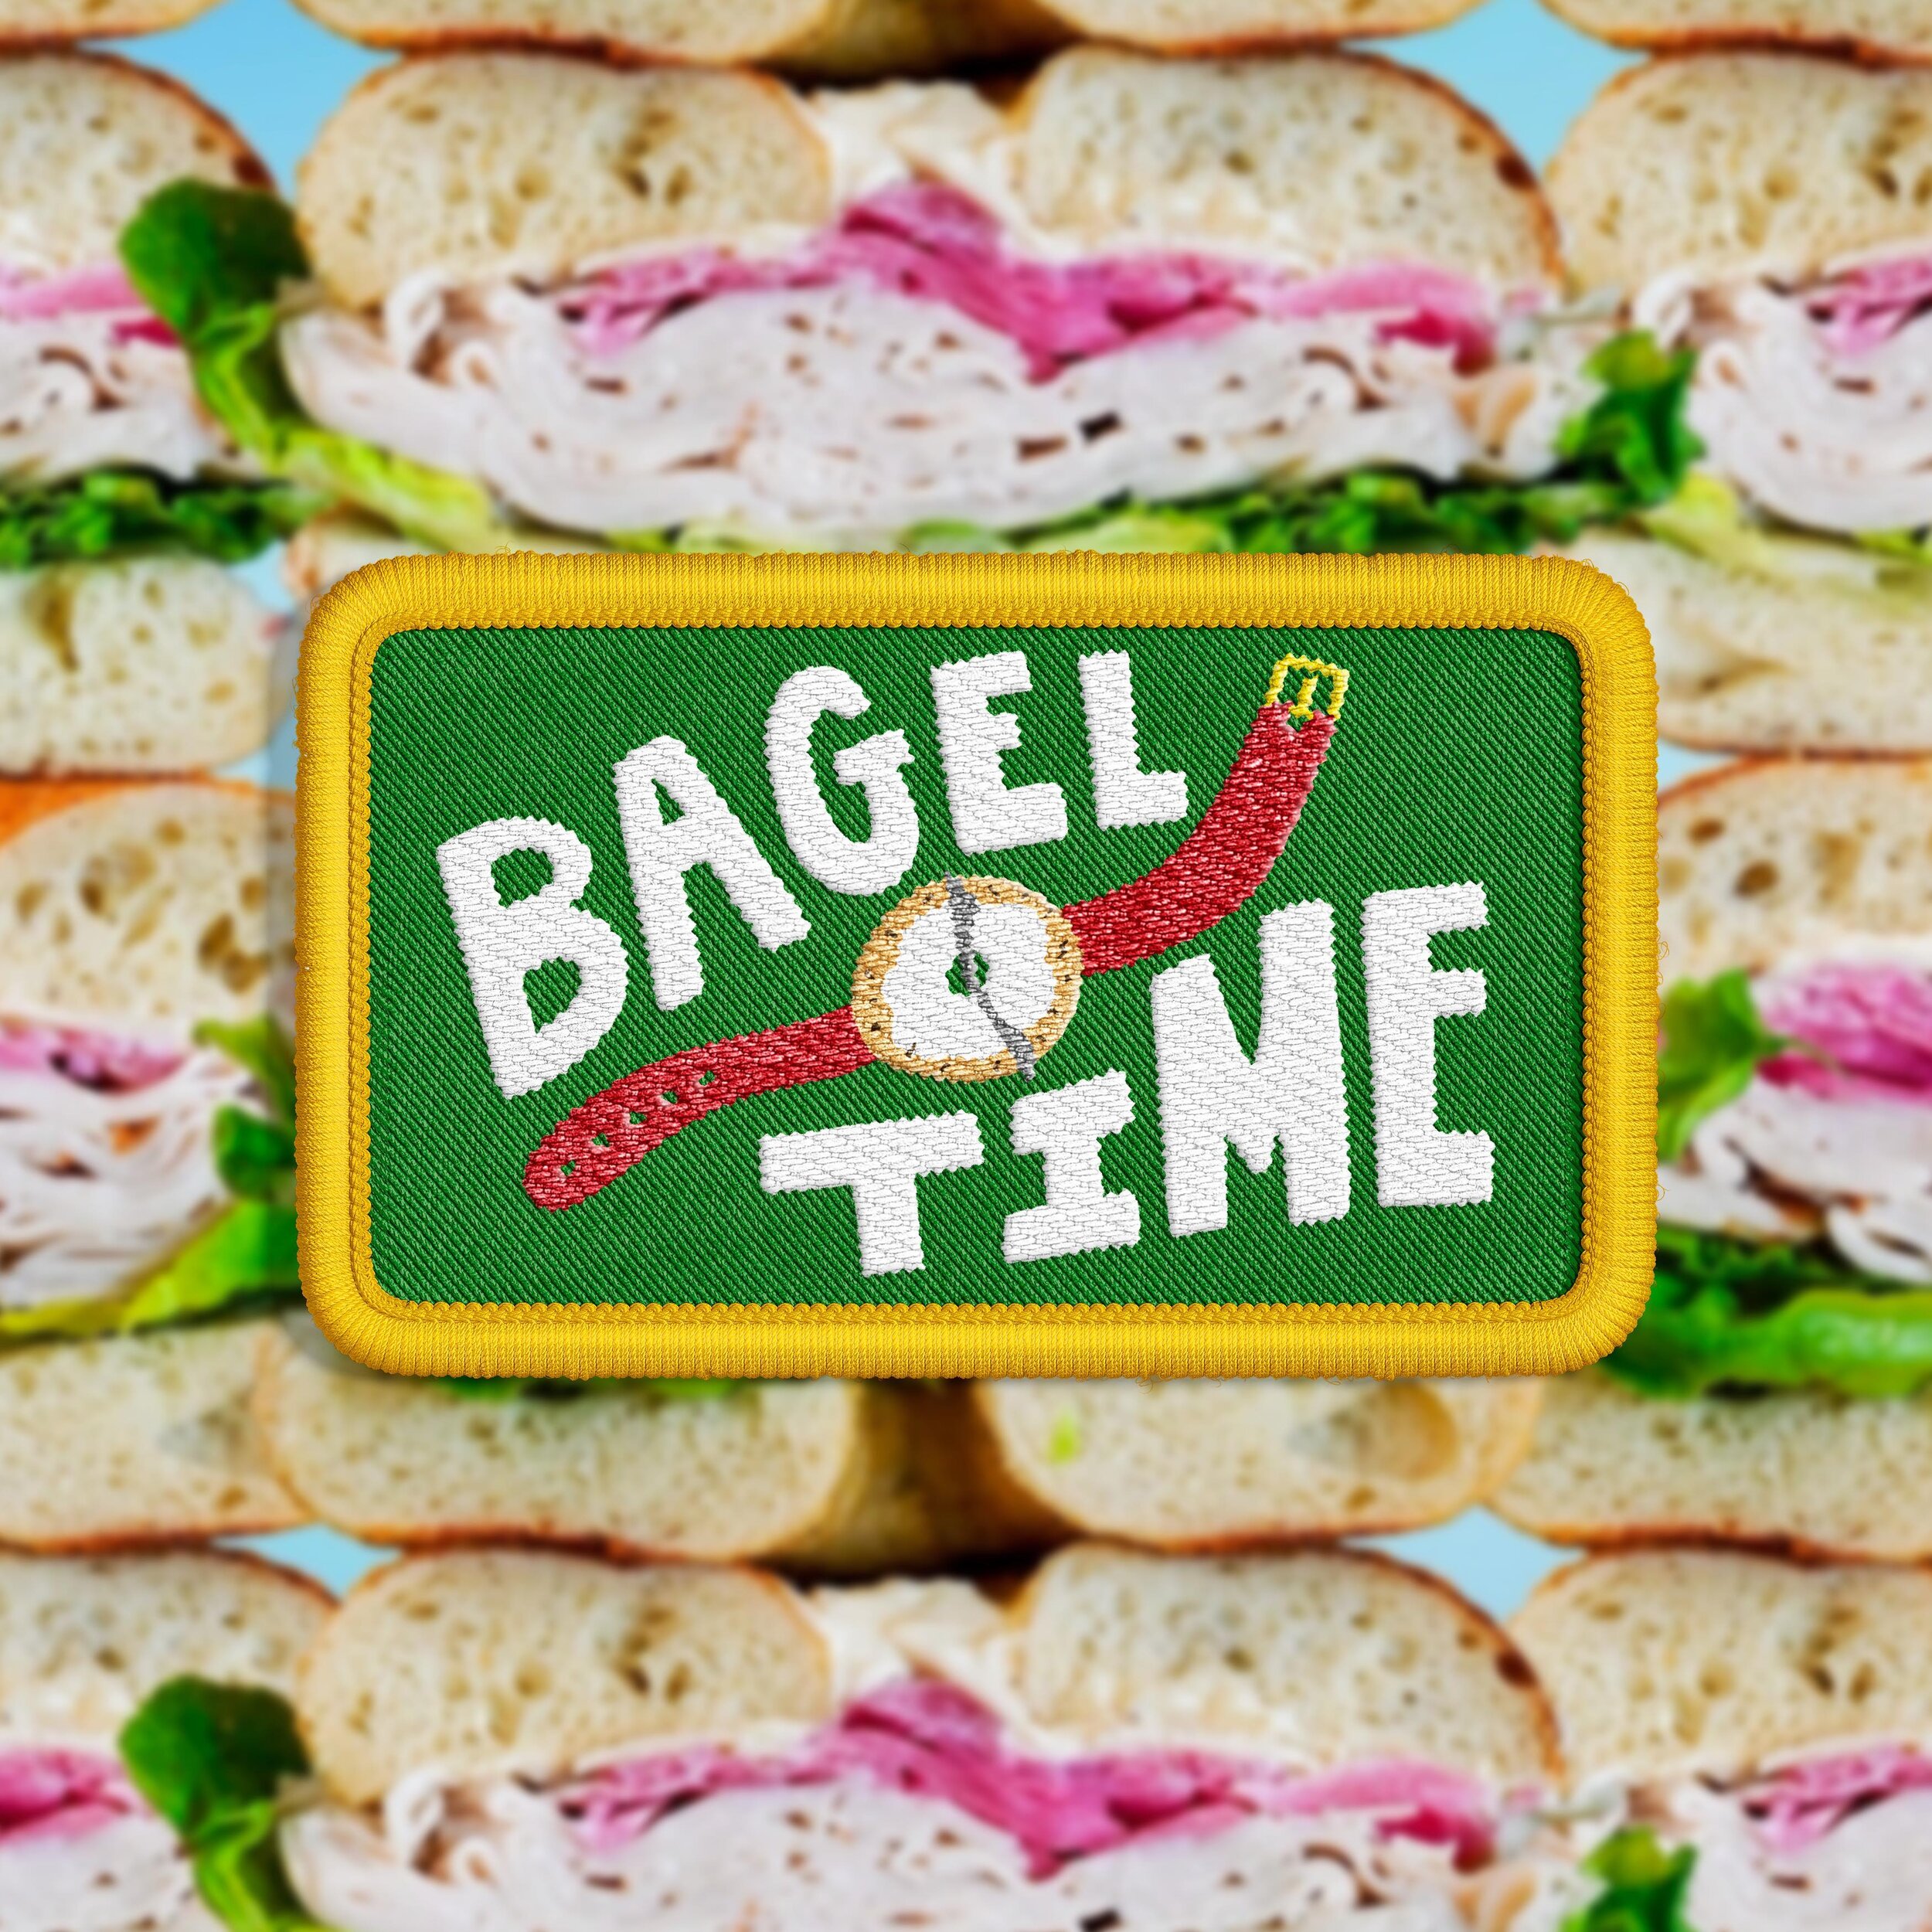 Bagel Time, baby! Cute little patch concept I designed last year alongside some t-shirts for the critically acclaimed @thebagel.shop in Little Rock. A few more  shots to come from this project 🤠🥯❤️